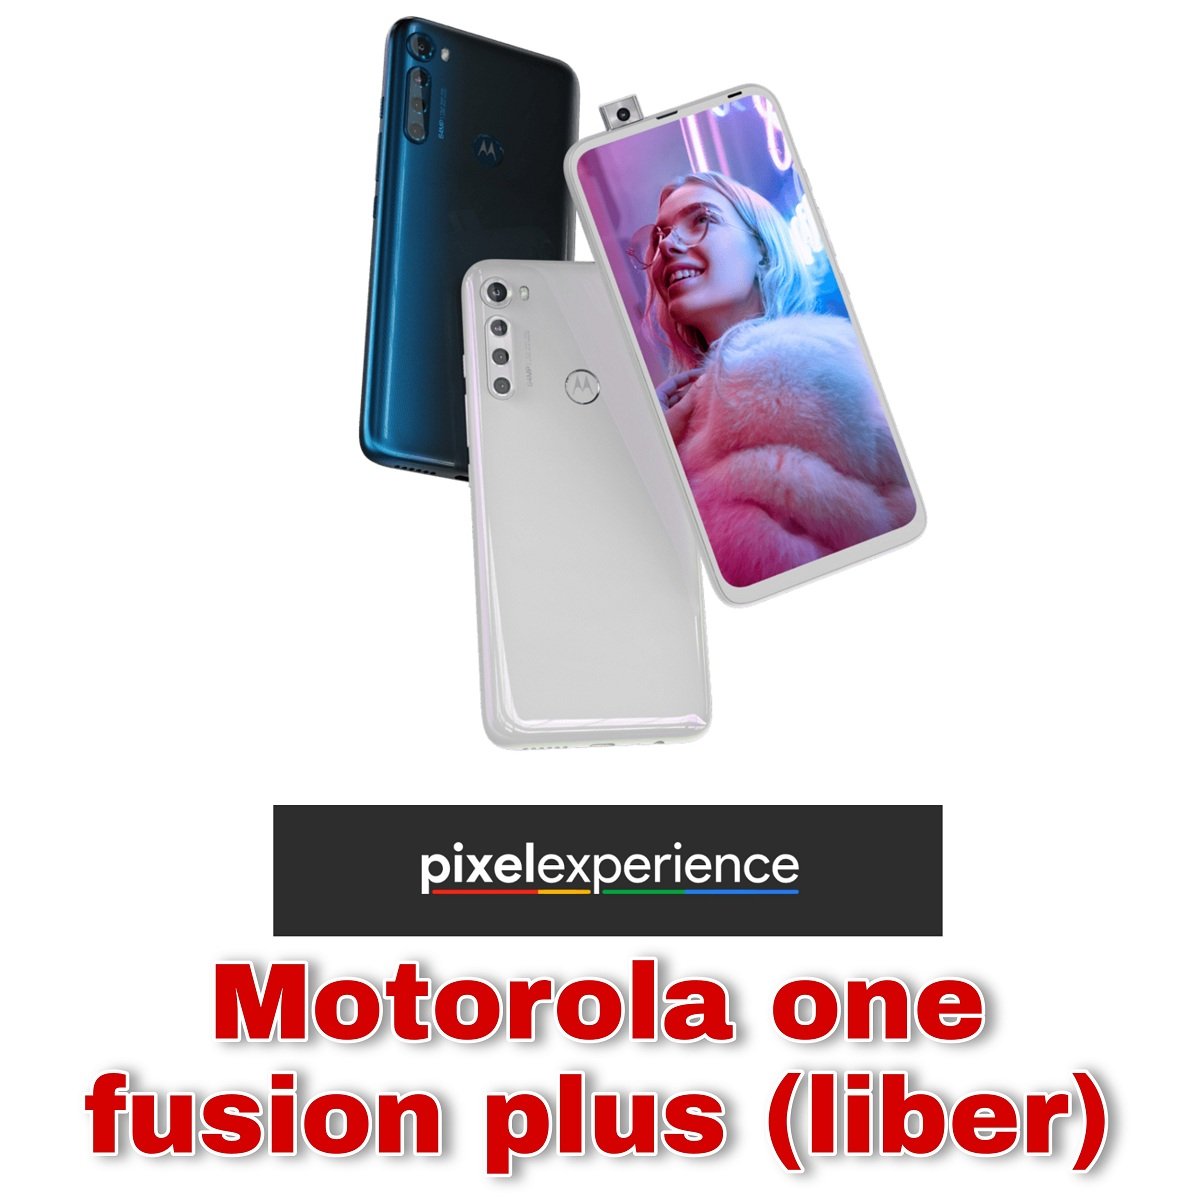 Pixel Experience 11 and 11 plus for Motorola one fusion plus(liber)